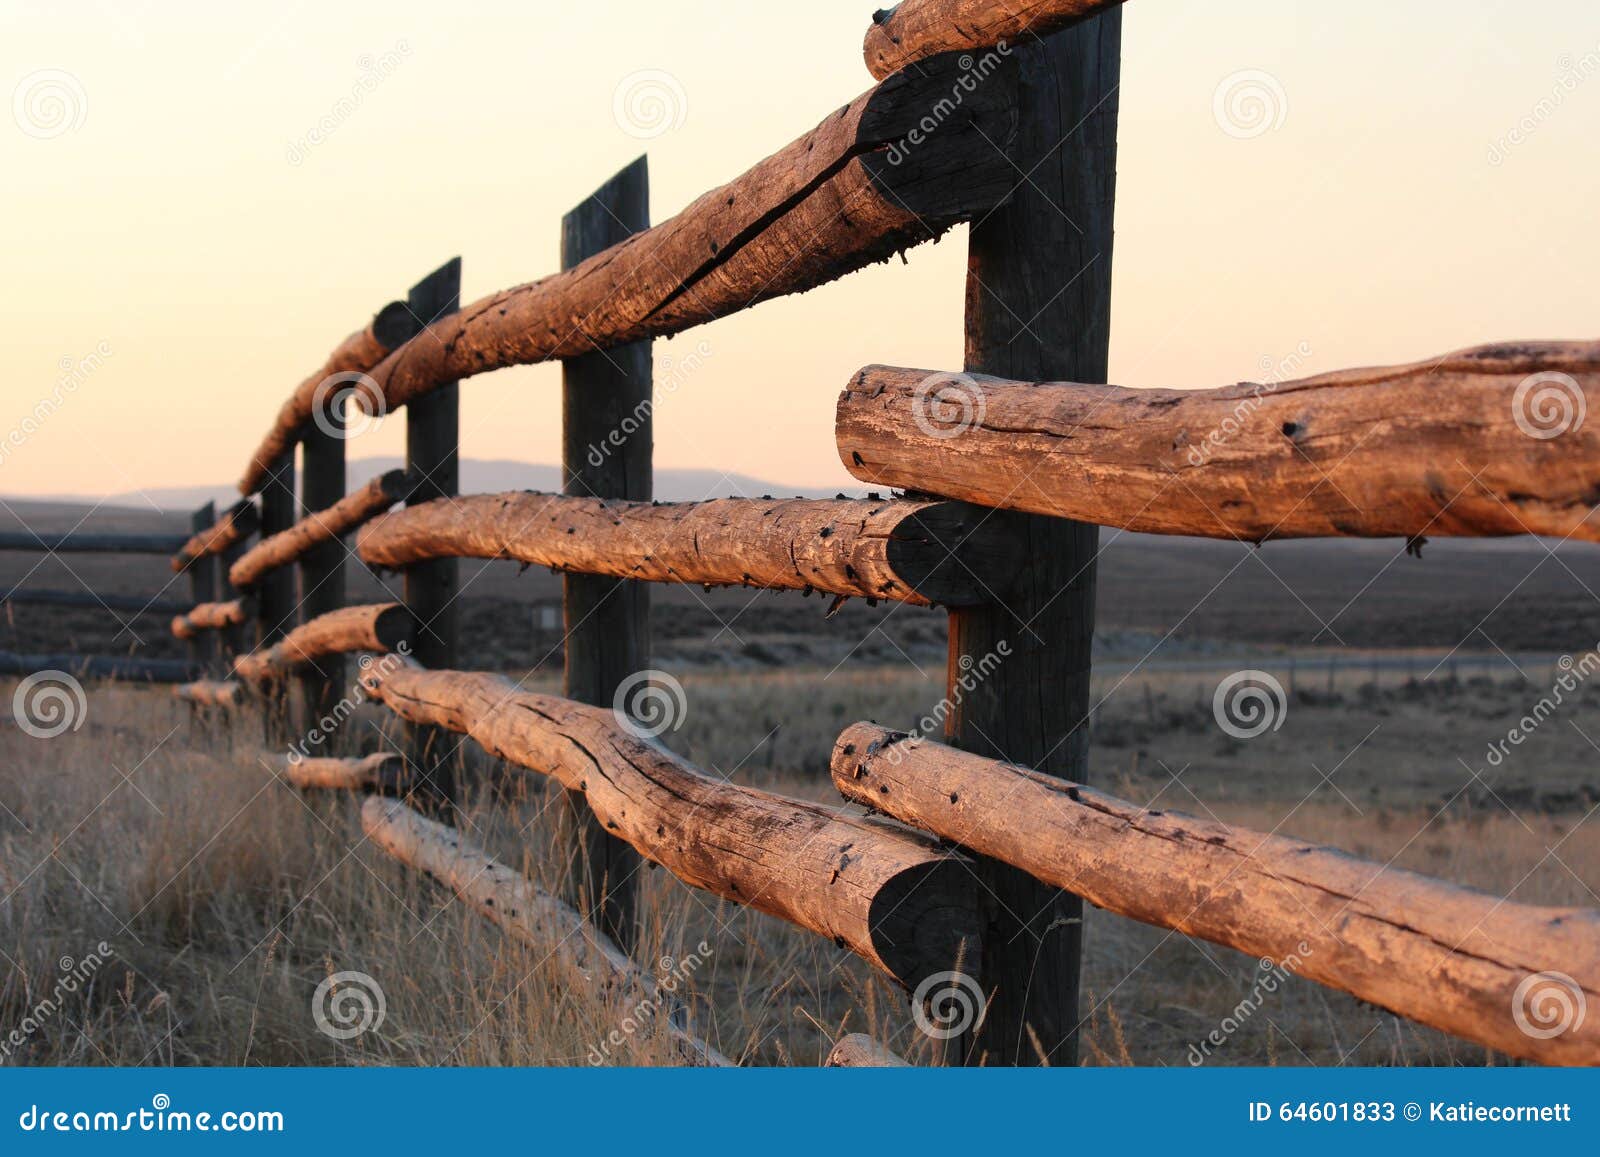 morning sun shining on a ranch fence in wyoming.